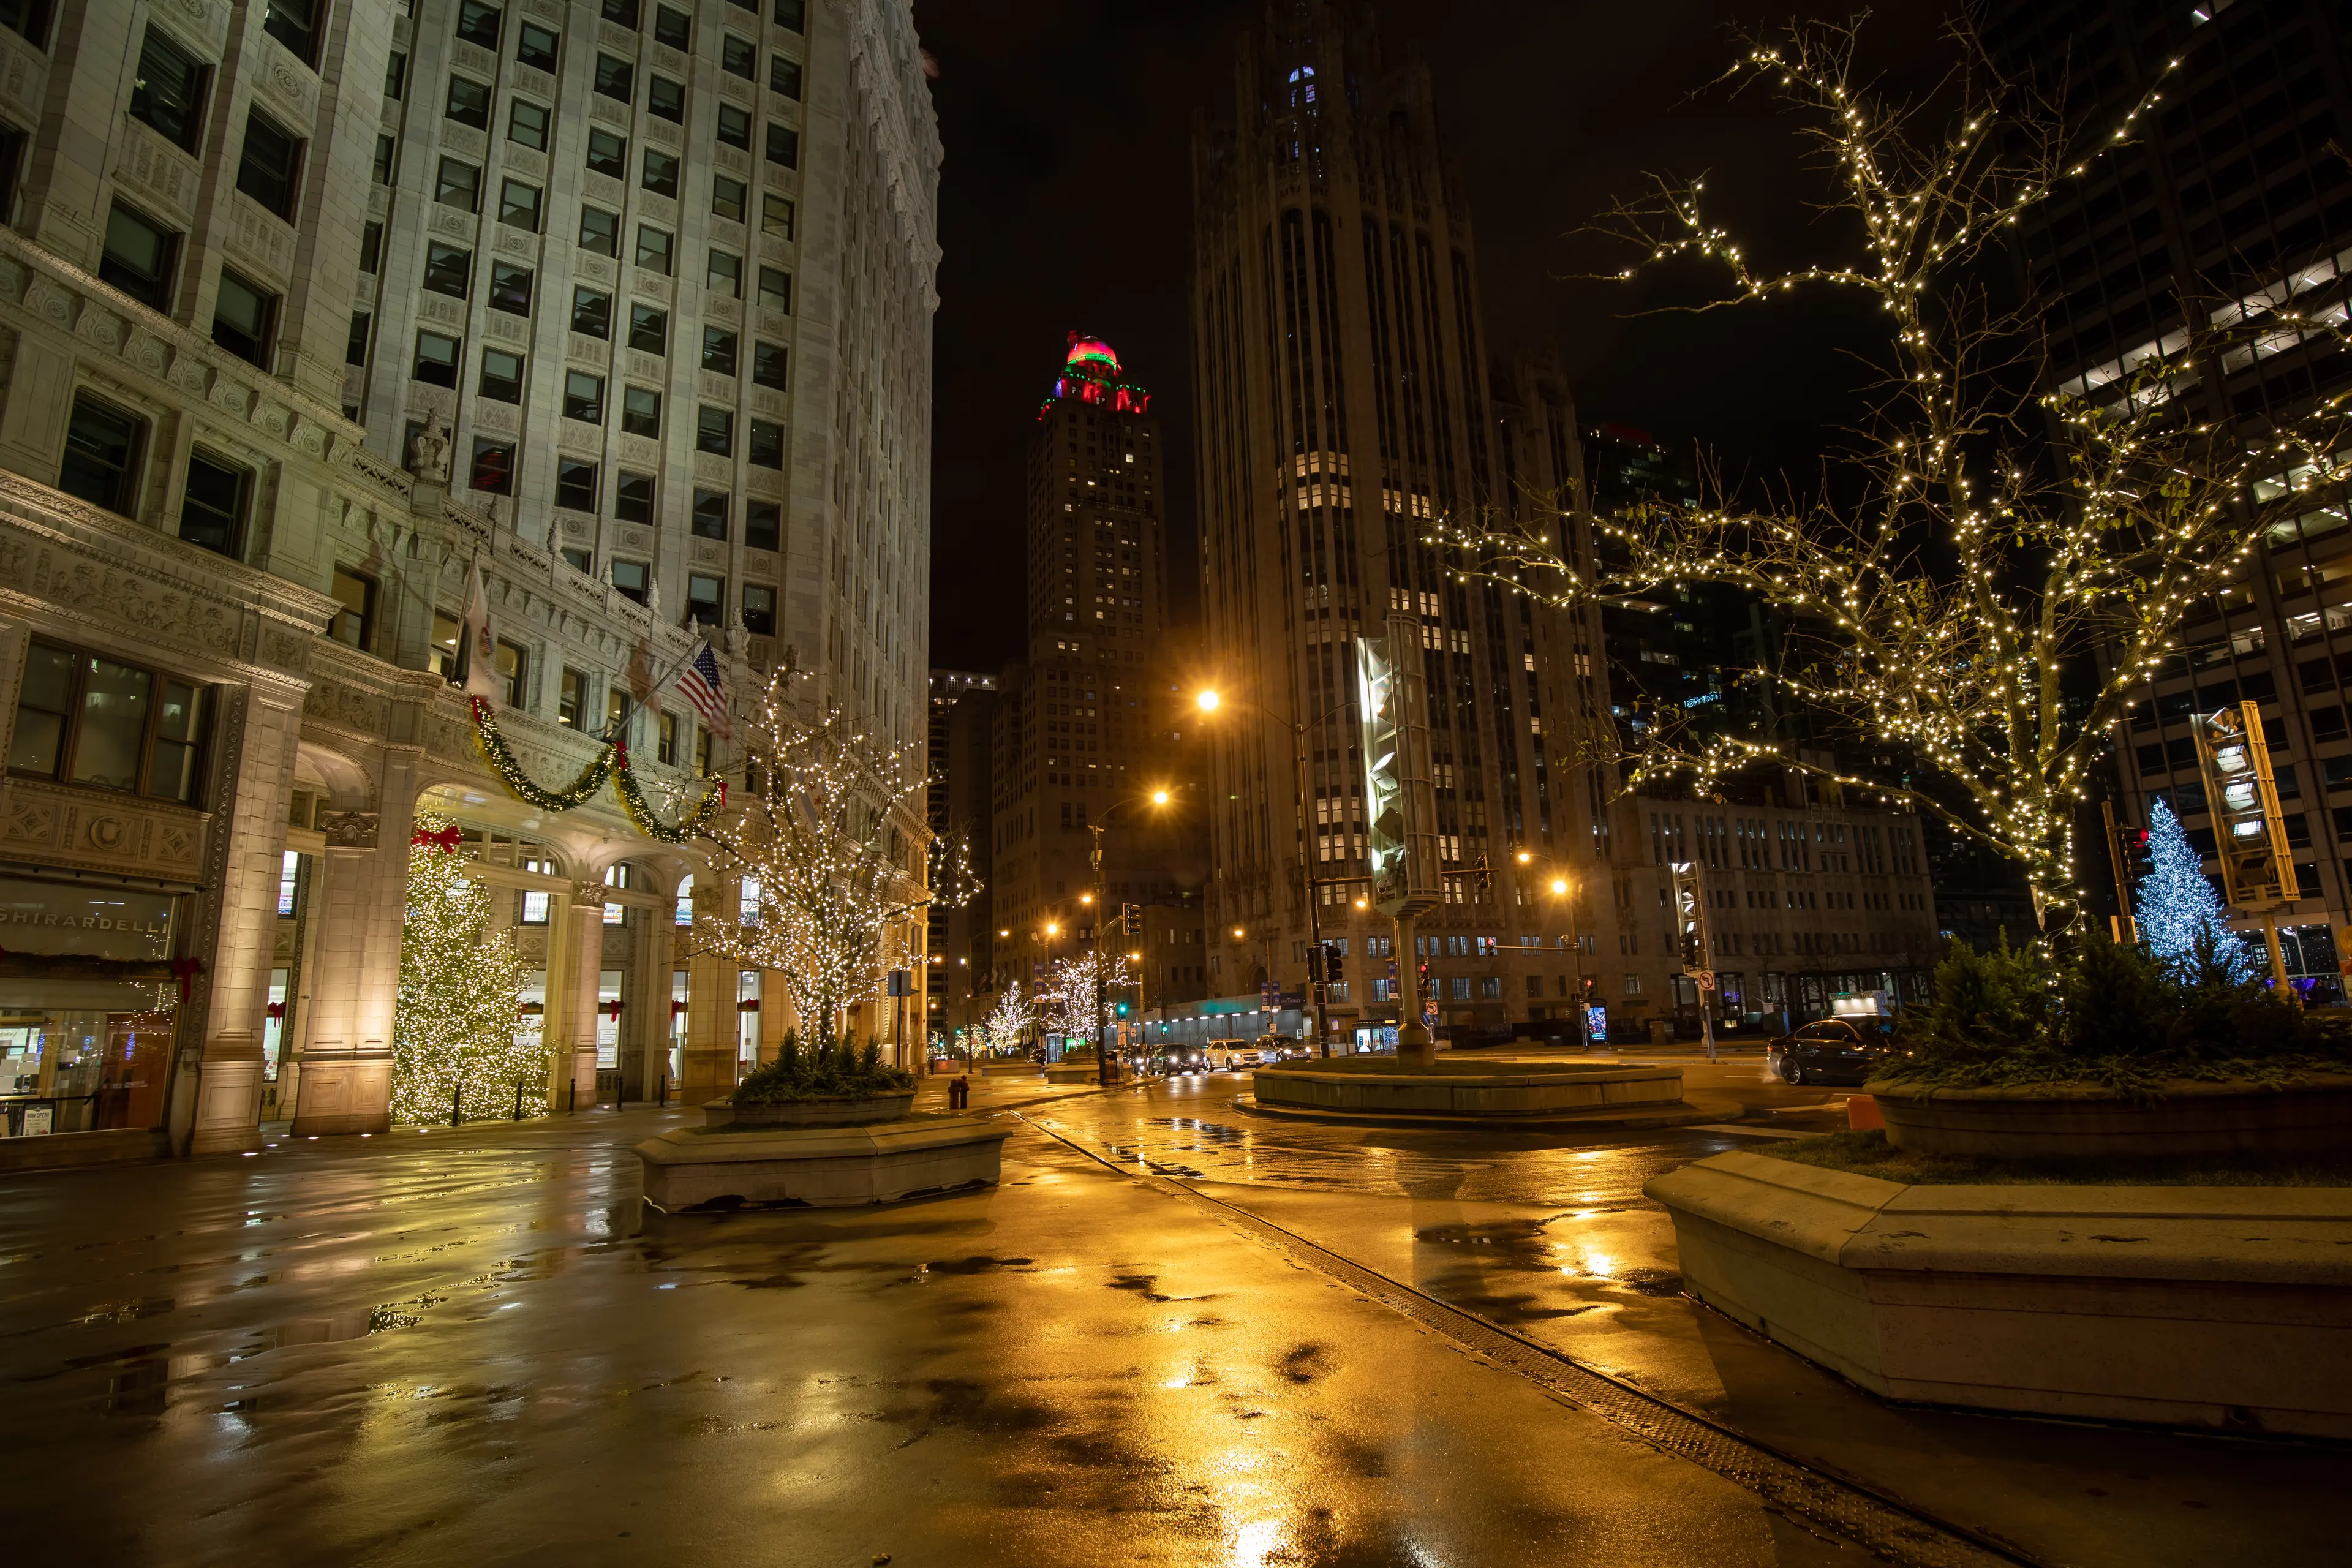 N Michigan Ave at night. Downtown Chicago during Christmas